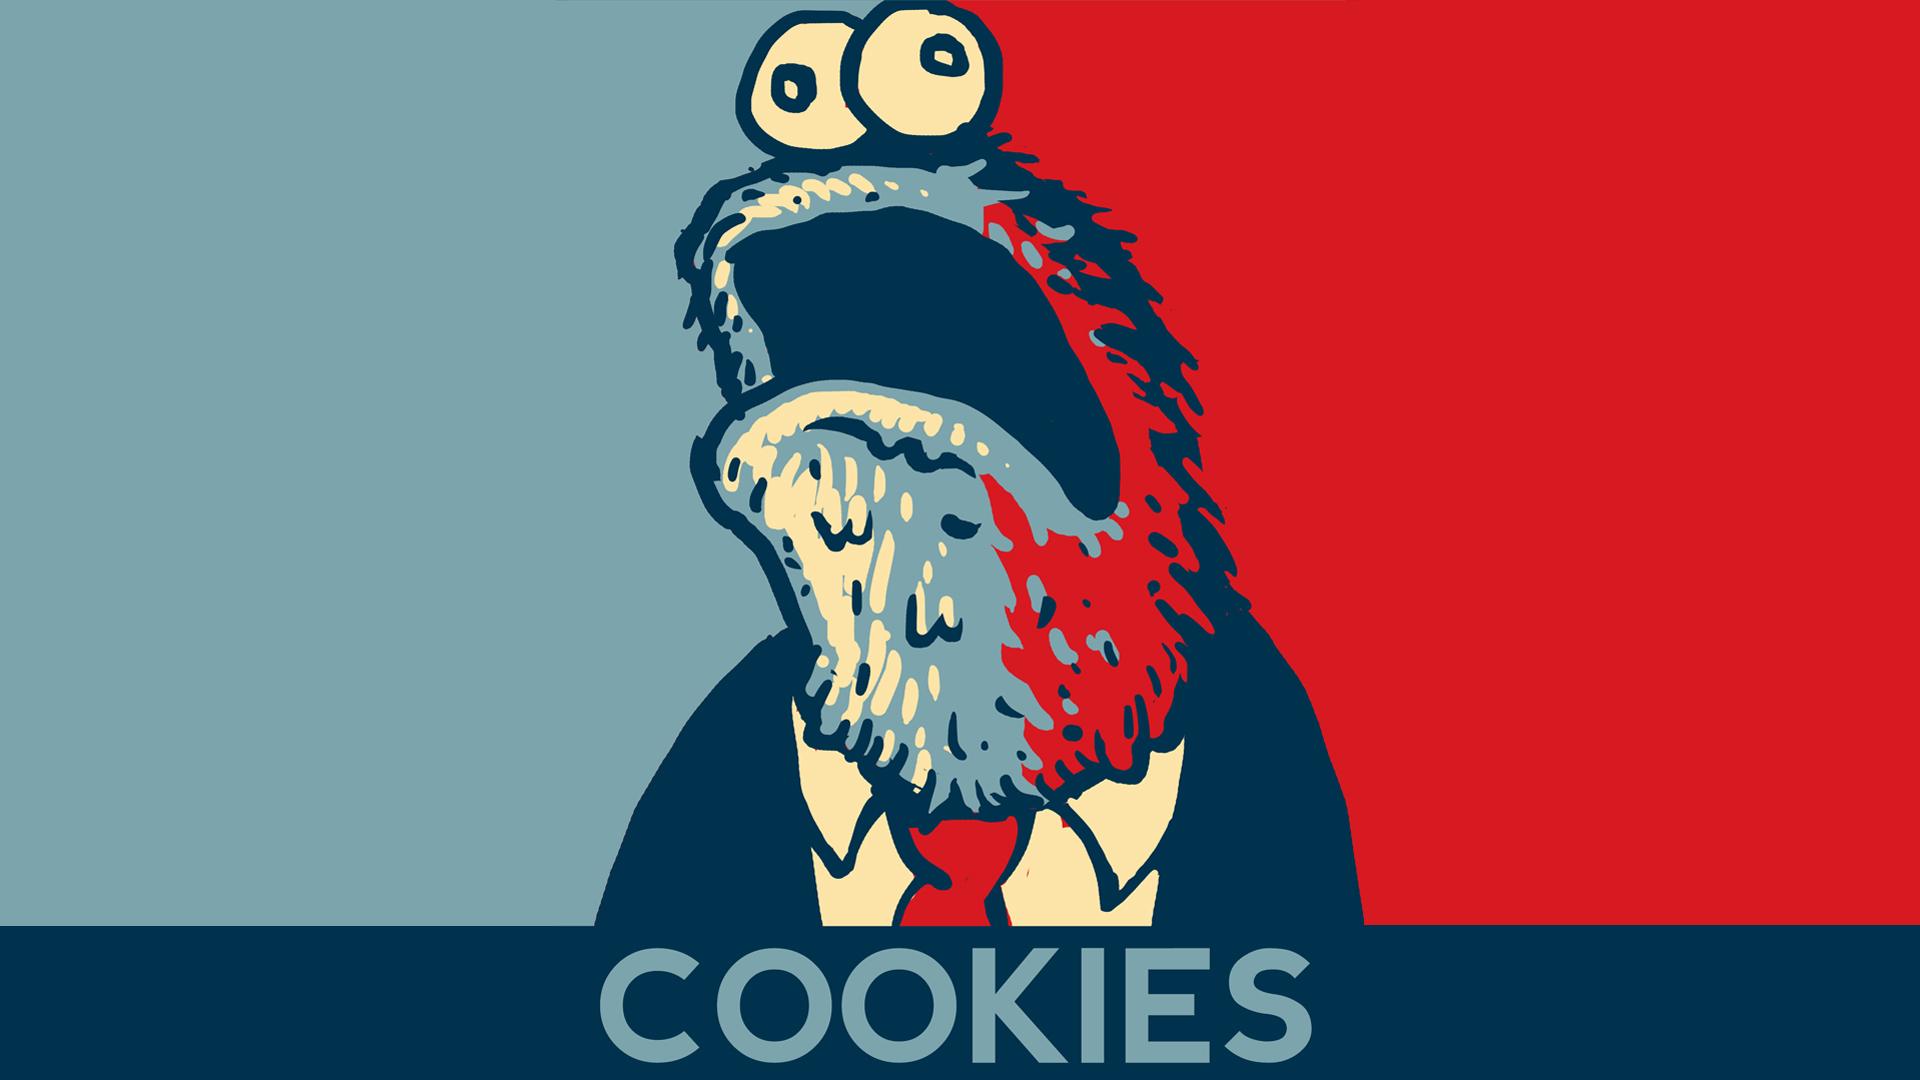 Free download Cookie Monster Wallpaper Awesome 46 Cookie Monster